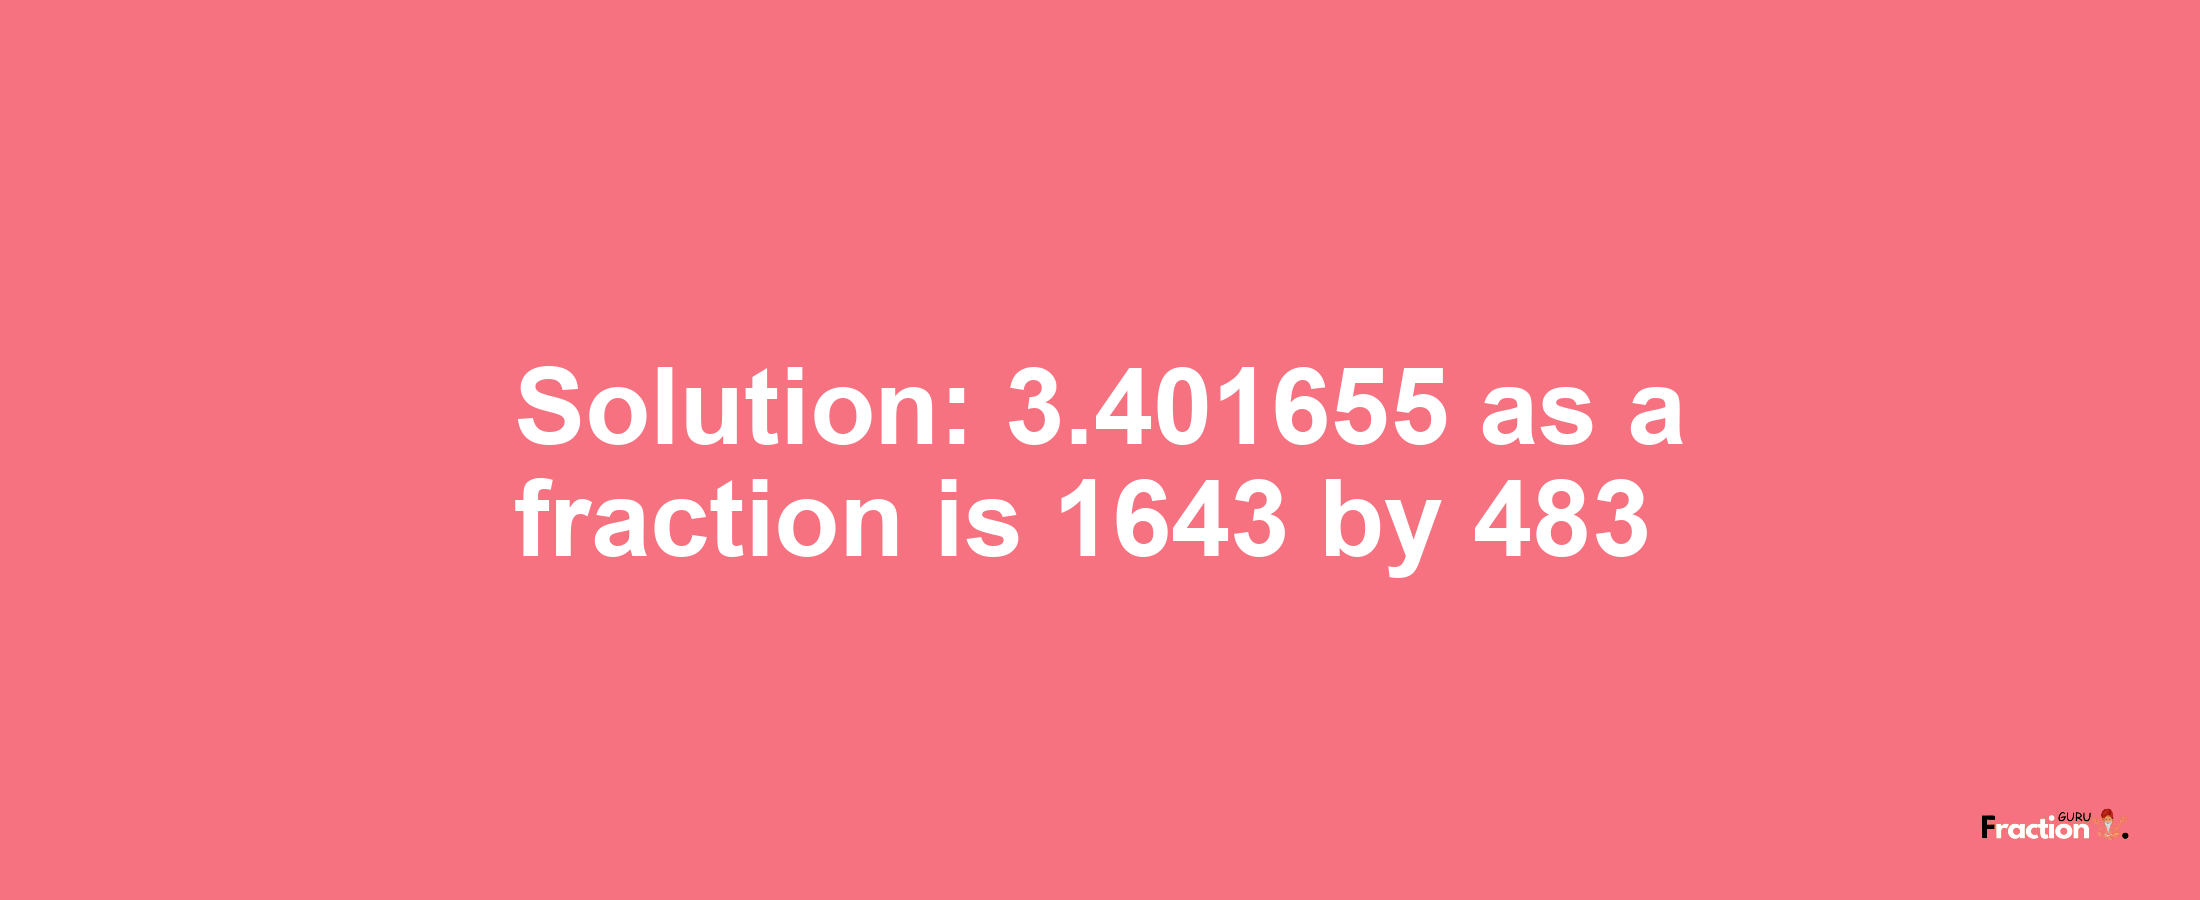 Solution:3.401655 as a fraction is 1643/483